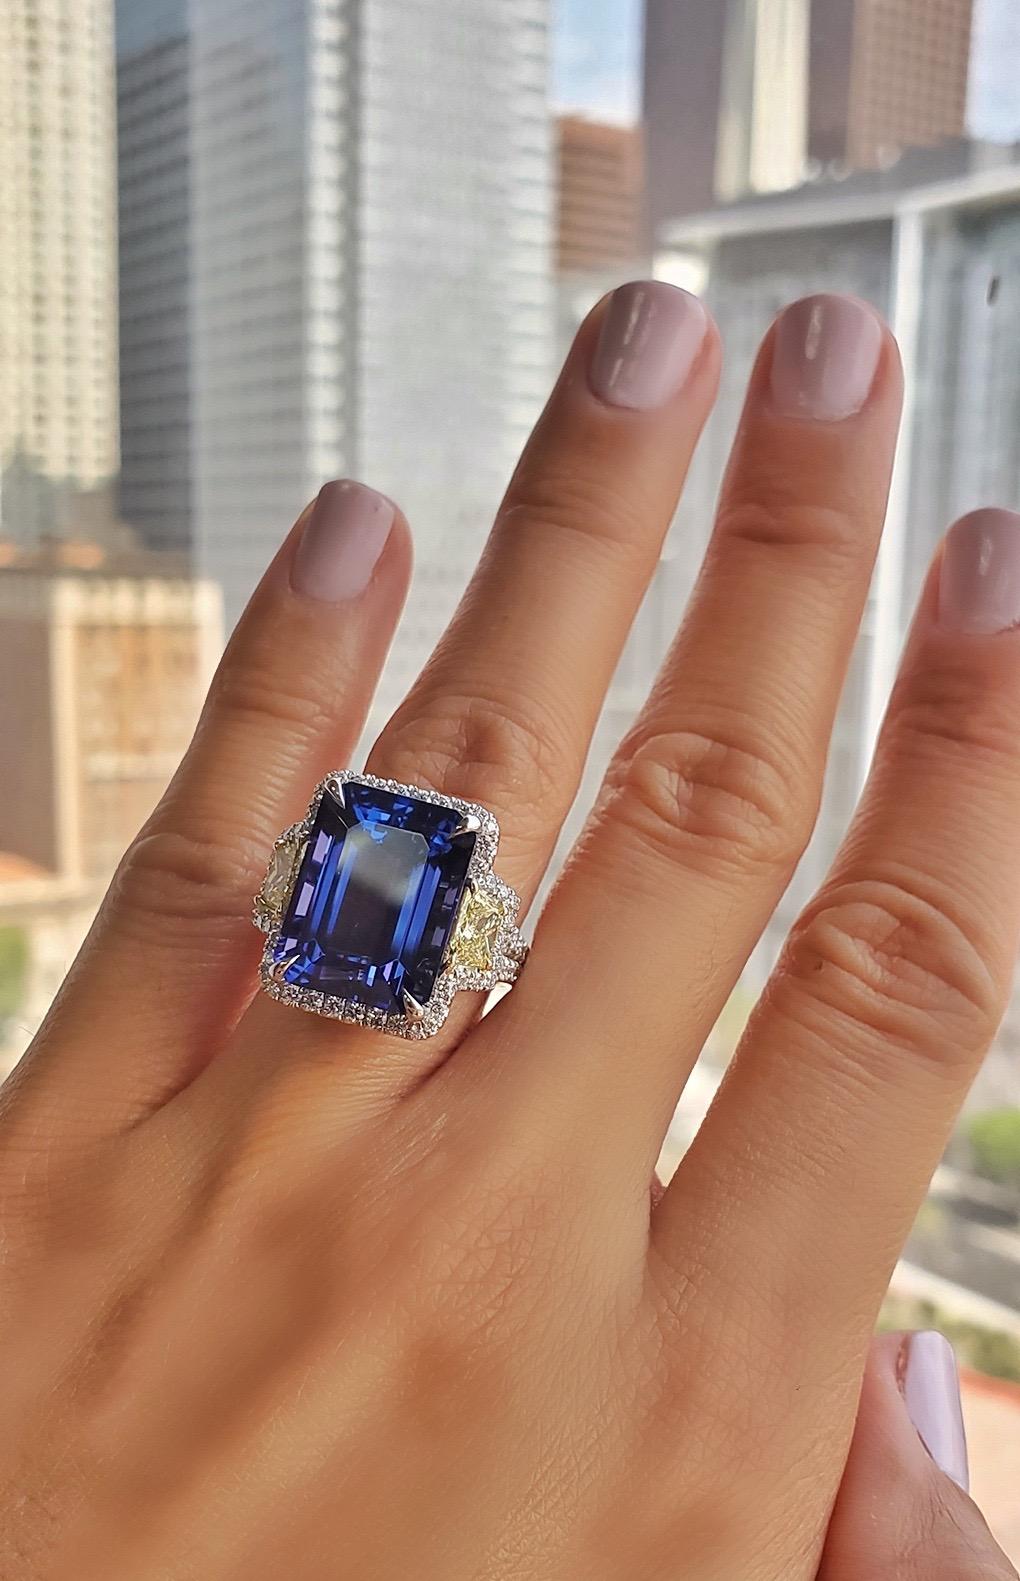 A Magnificent Modern Platinum Cocktail Ring set with a GIA Certified 13.82 Carat Natural Violet Tanzanite measuring 15.46x11.80x8.11mm. 

The trapezoid sidestones are GIA certified Fancy Yellow diamonds weighing 0.91 carats (0.45 & 0.46) and the